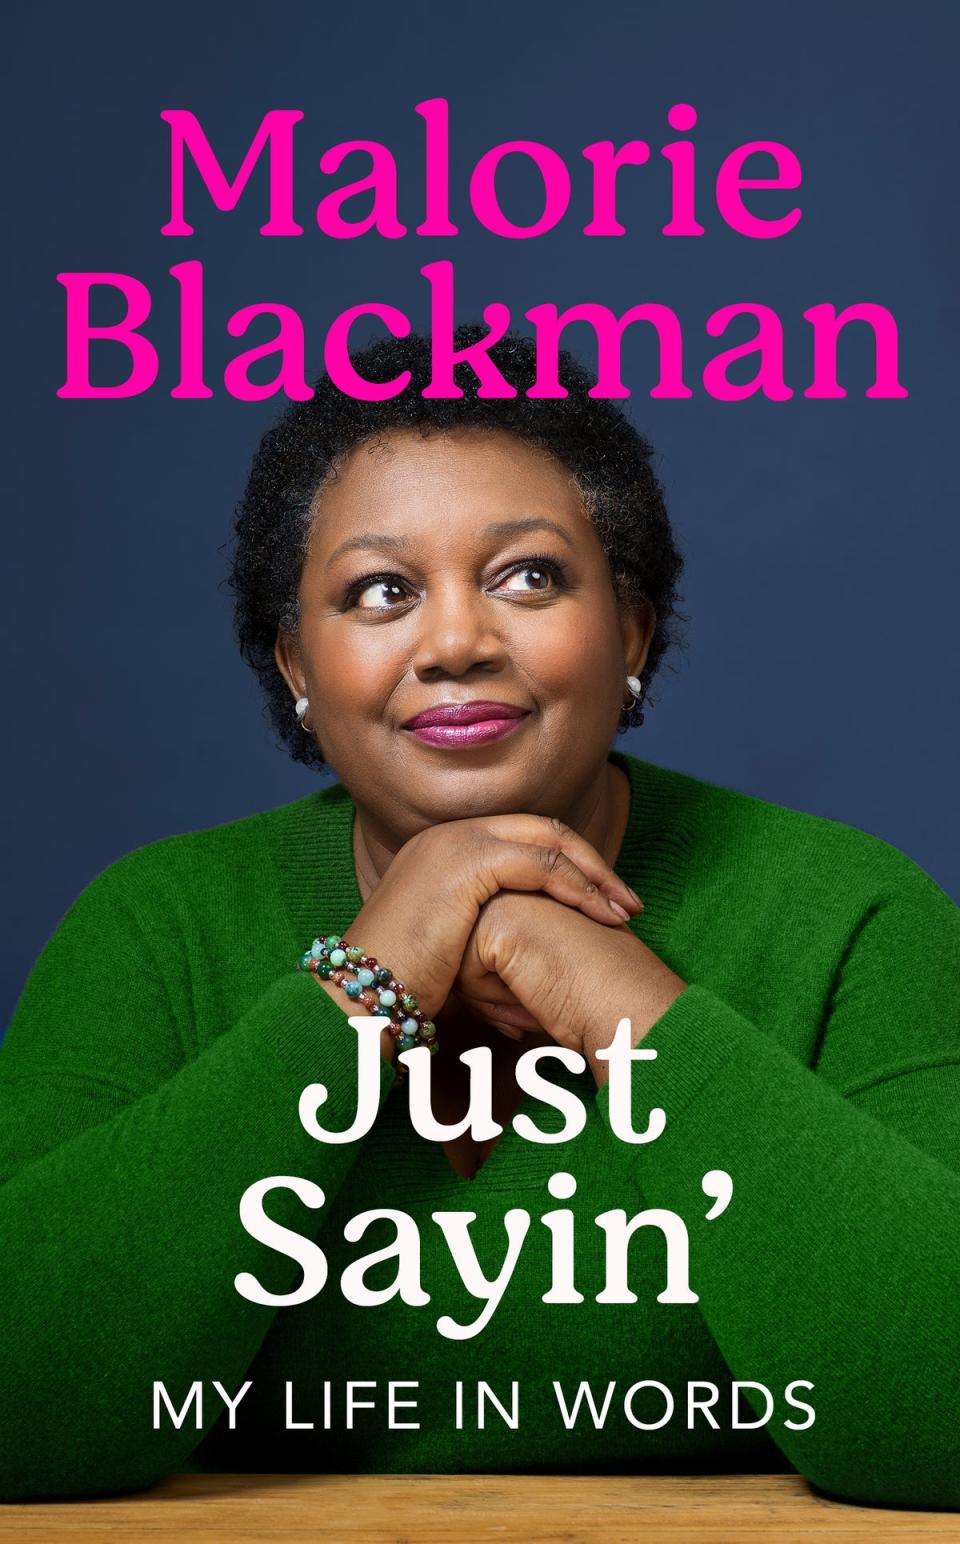 Just Saying’: My Life in Words by Malorie Blackman (Supplied)